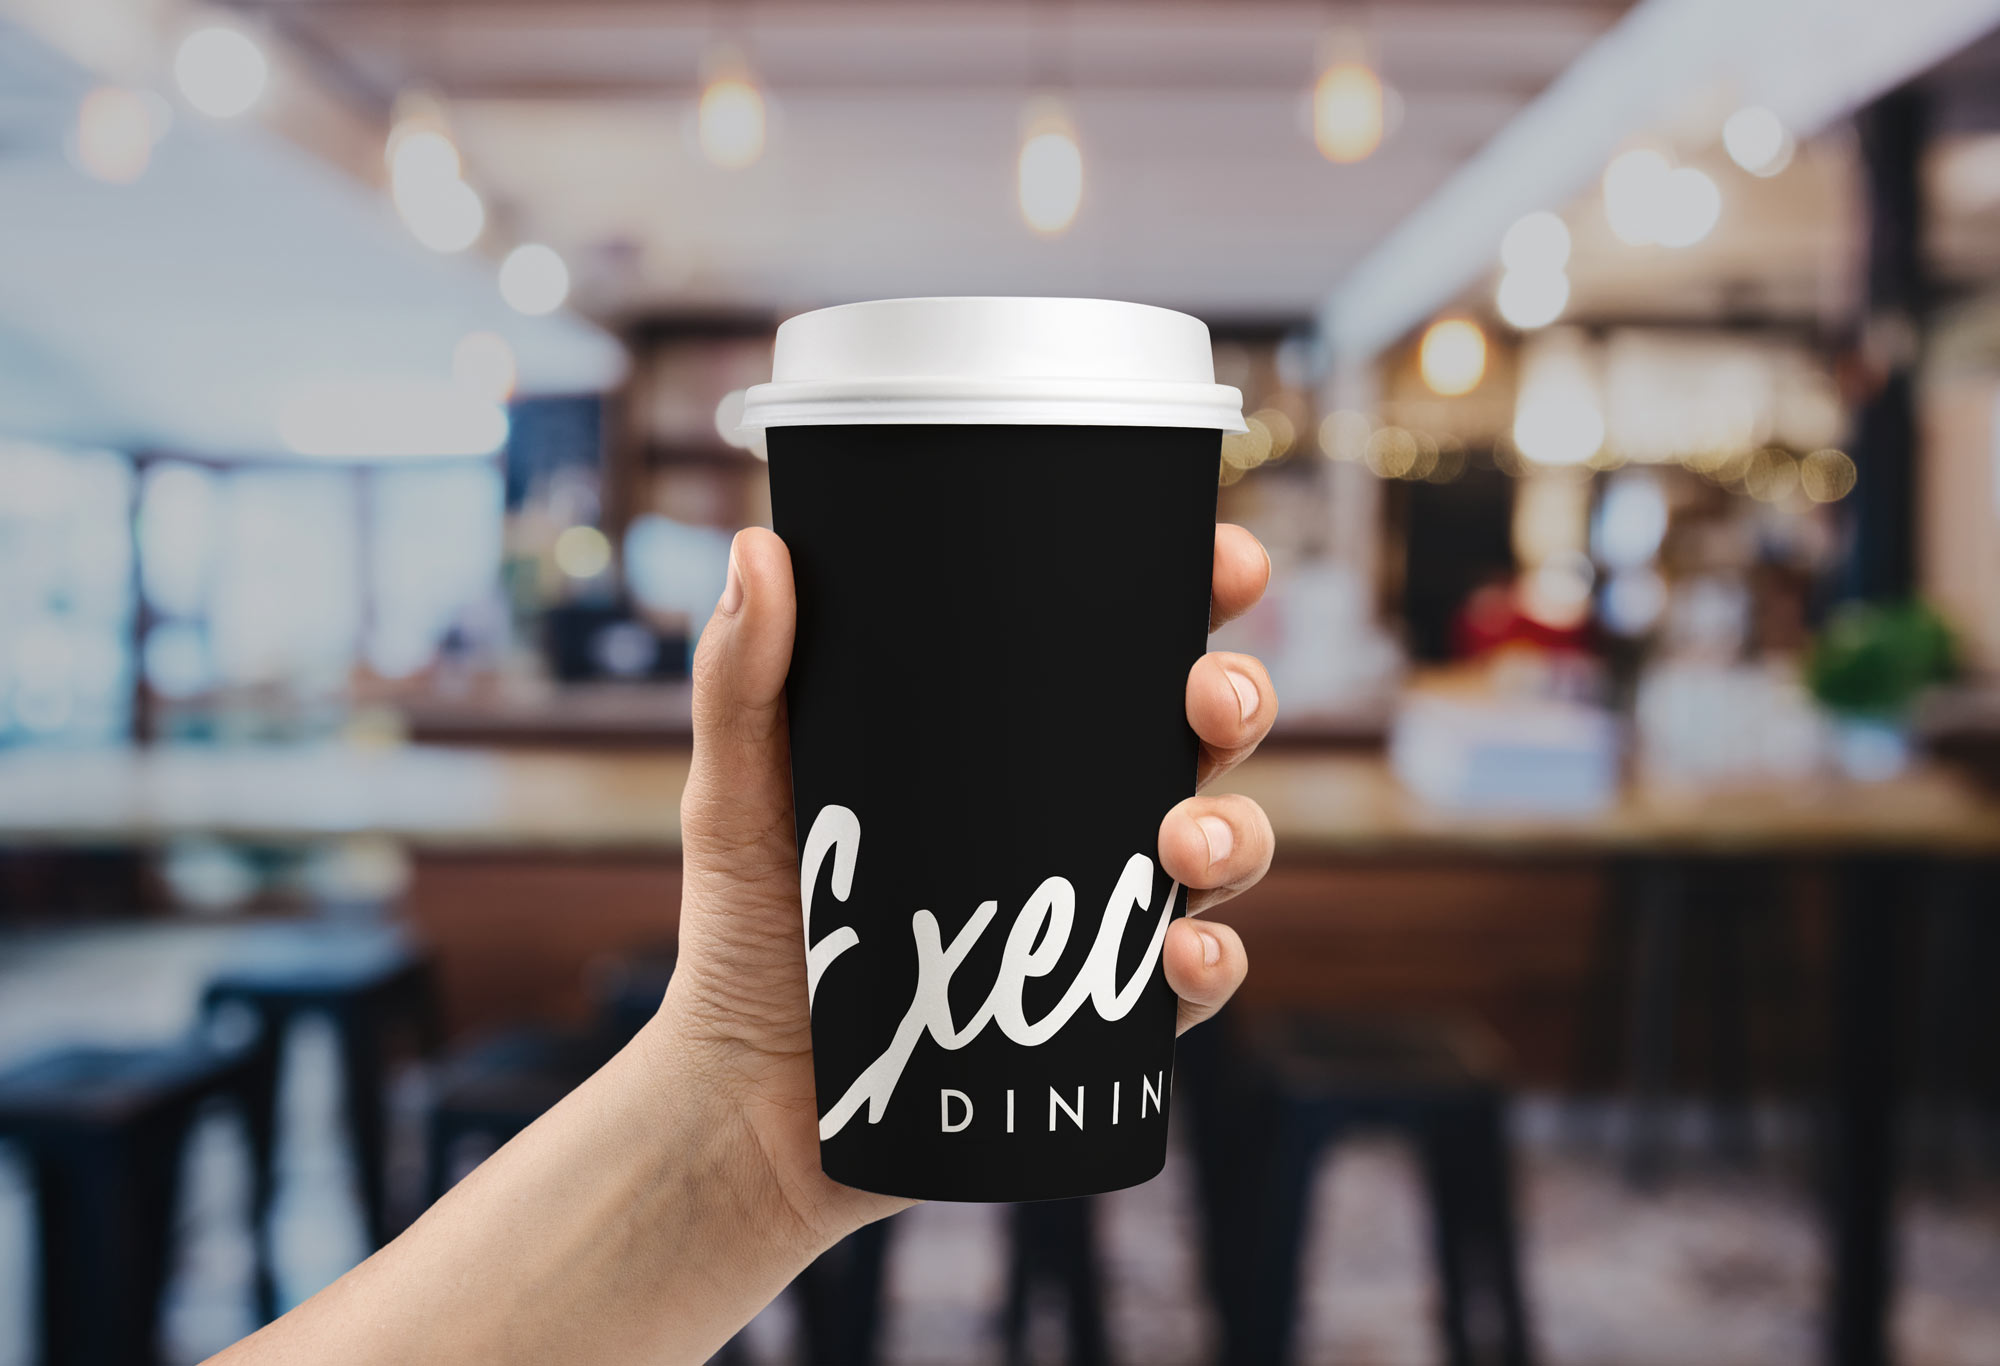 Executive Dining Branding - Coffee Cup design